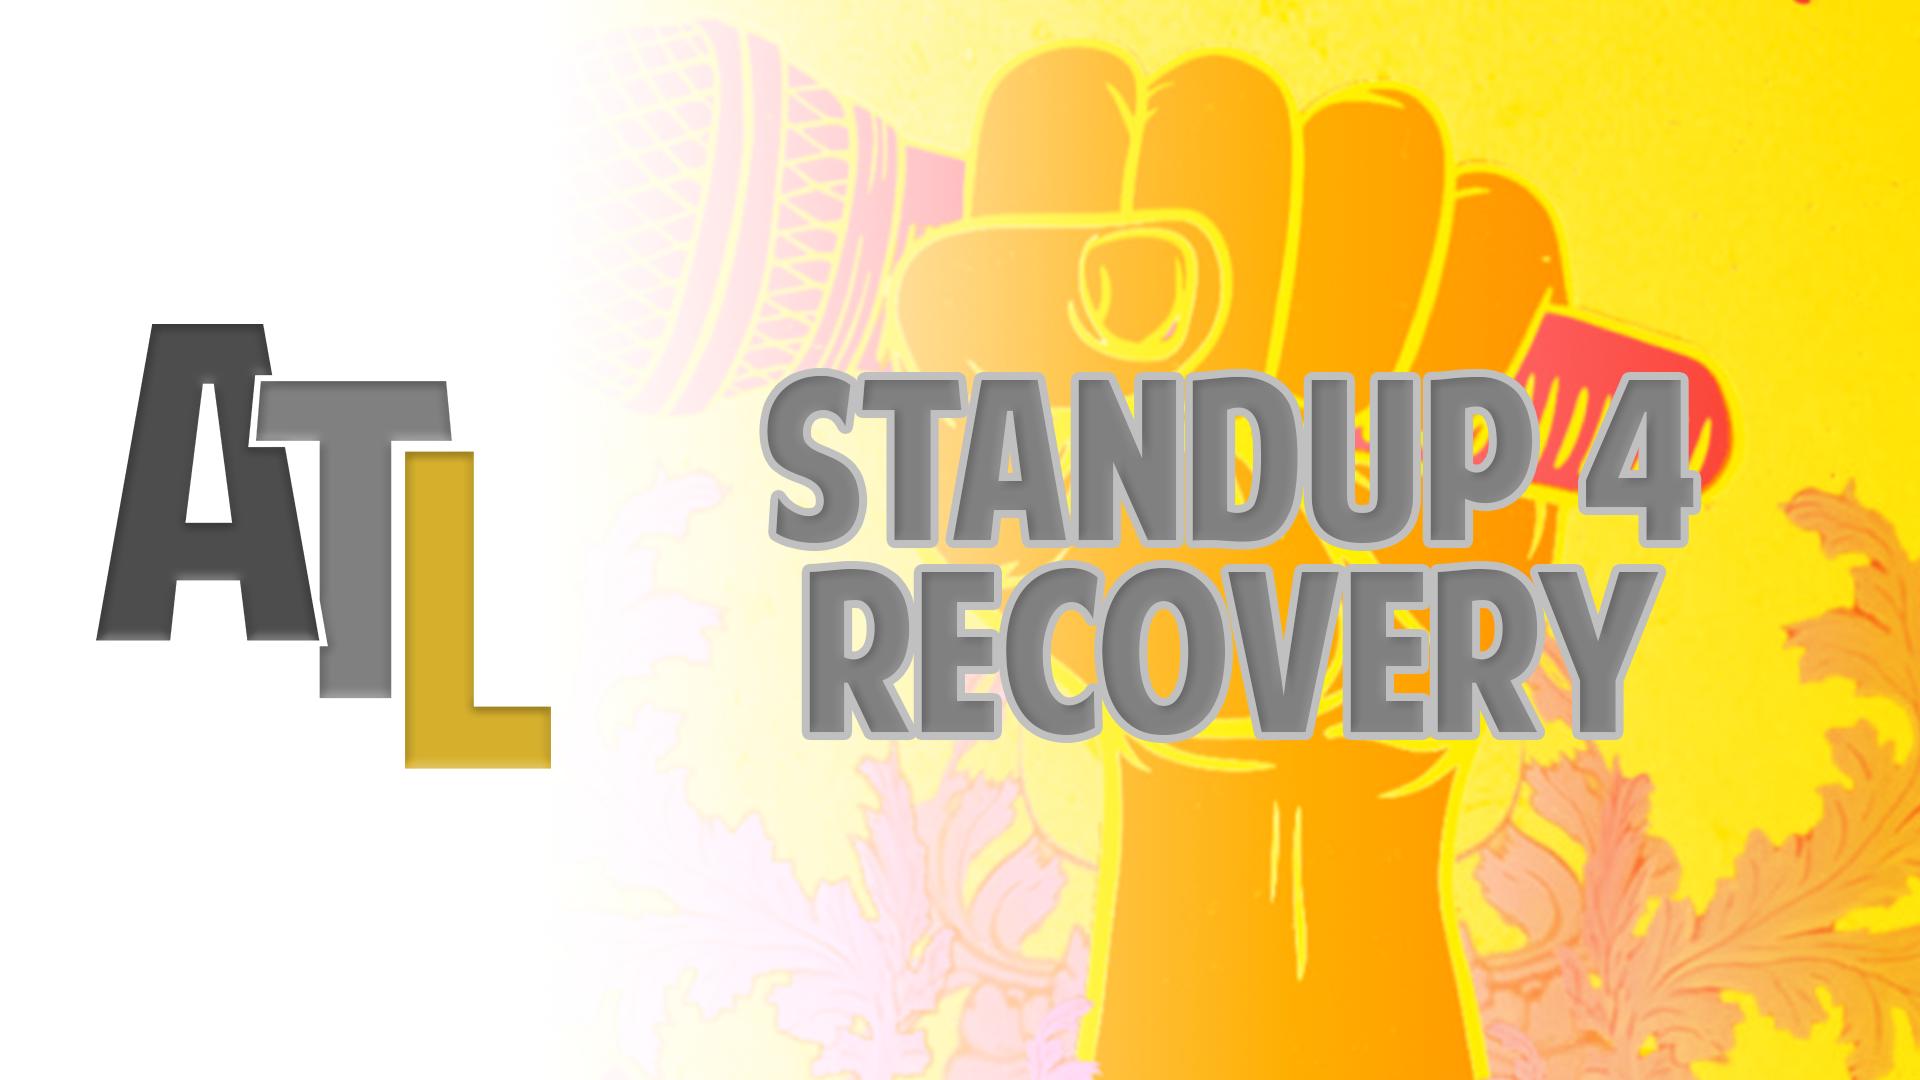 Standup 4 Recovery